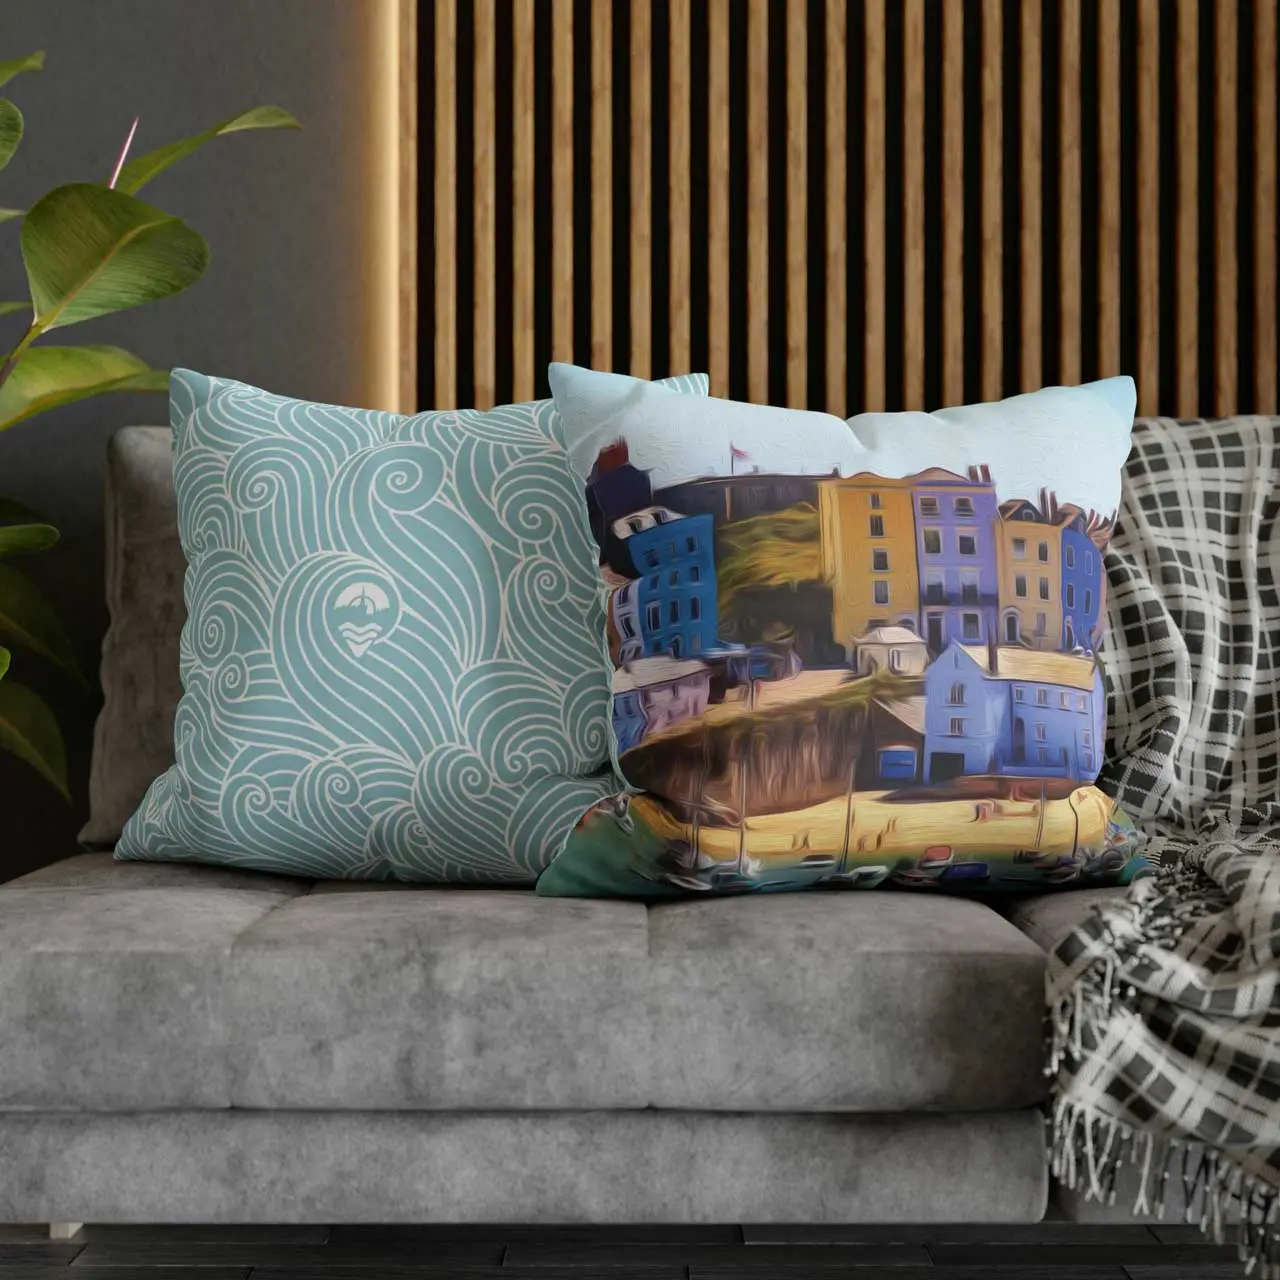 Around Tenby Tenby Harbour Beach and Aqua Waves Cushion Cover